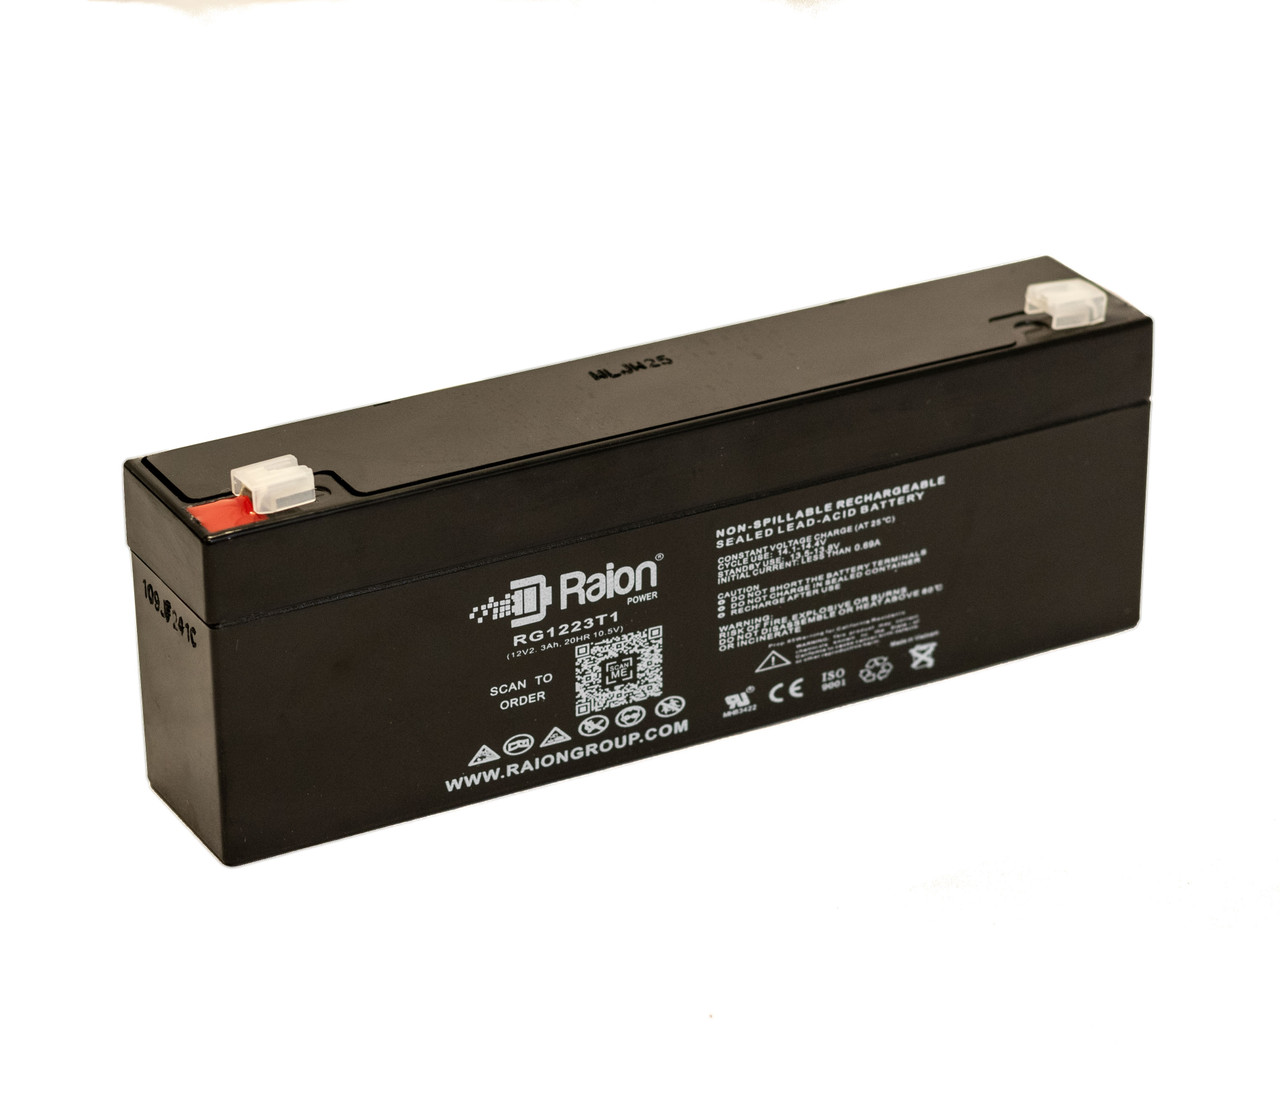 Raion Power RG1223T1 Replacement Battery for Schiller America AT-6, 60 EKG Machine